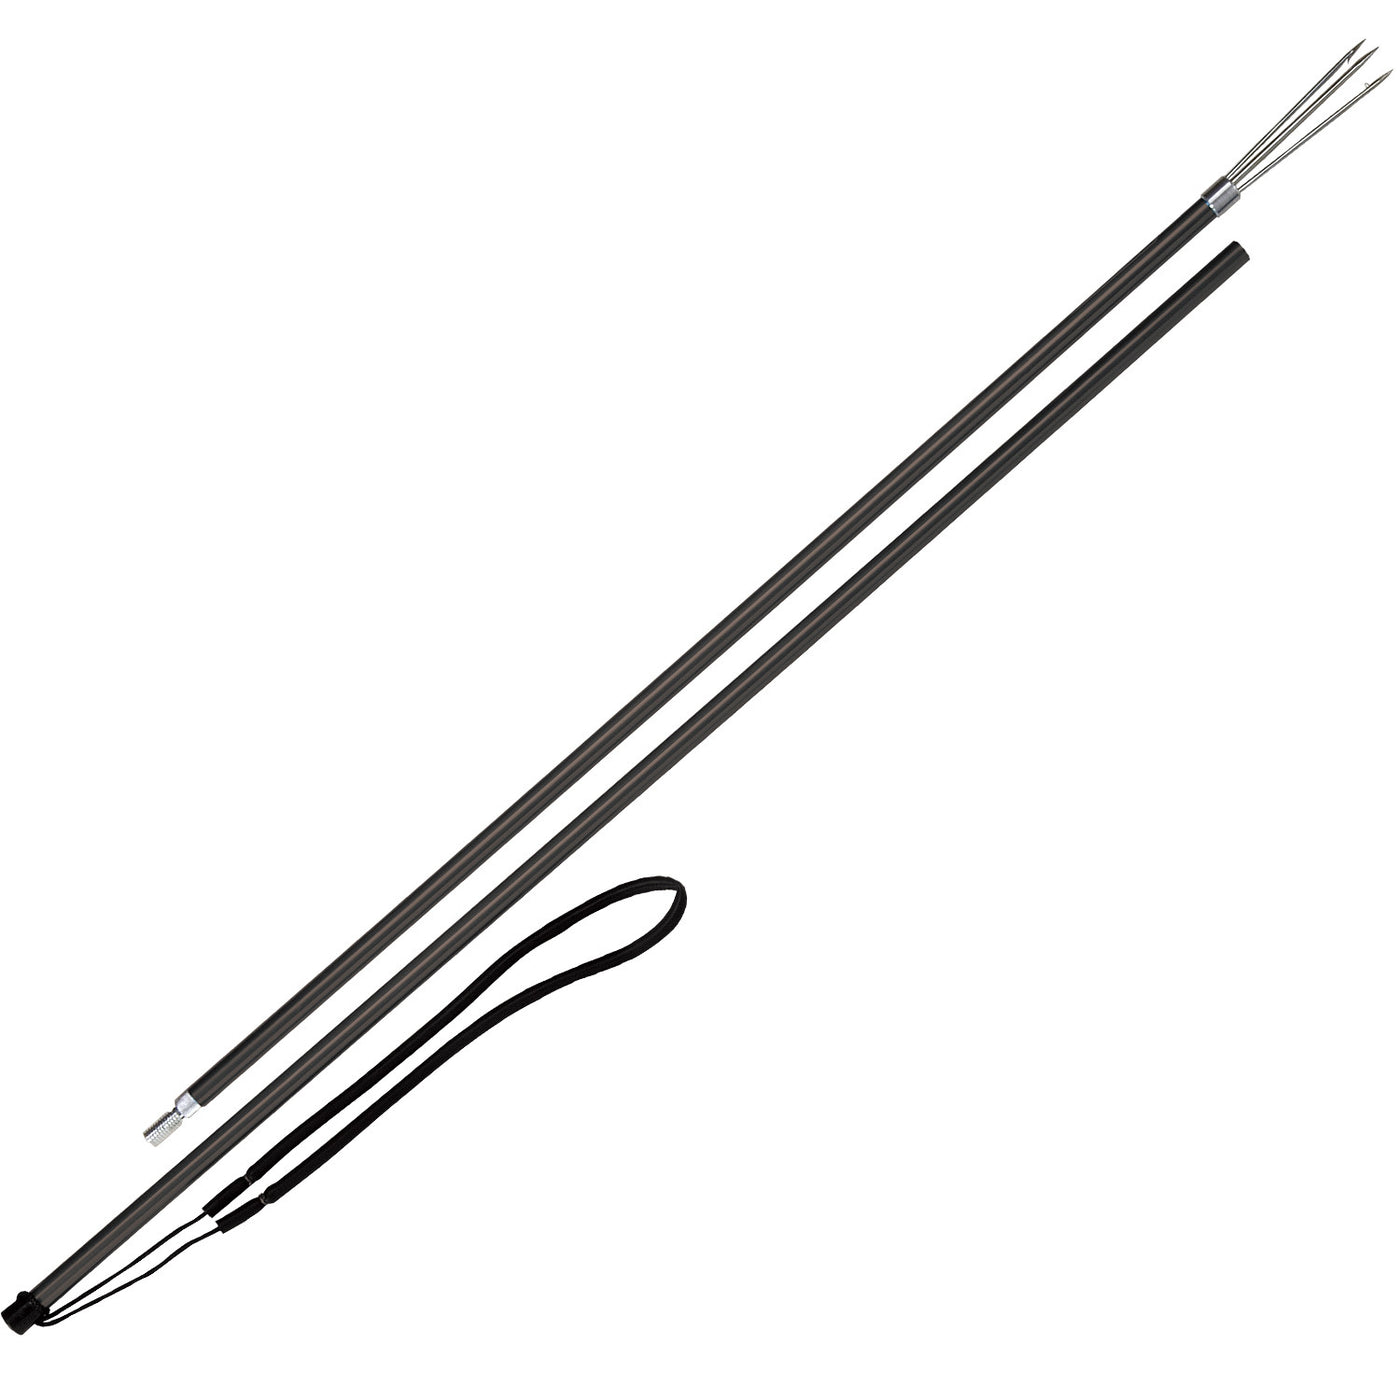 IST Aluminum 2 Segment Pole Spear with 3-Prong Paralyzer Tip –